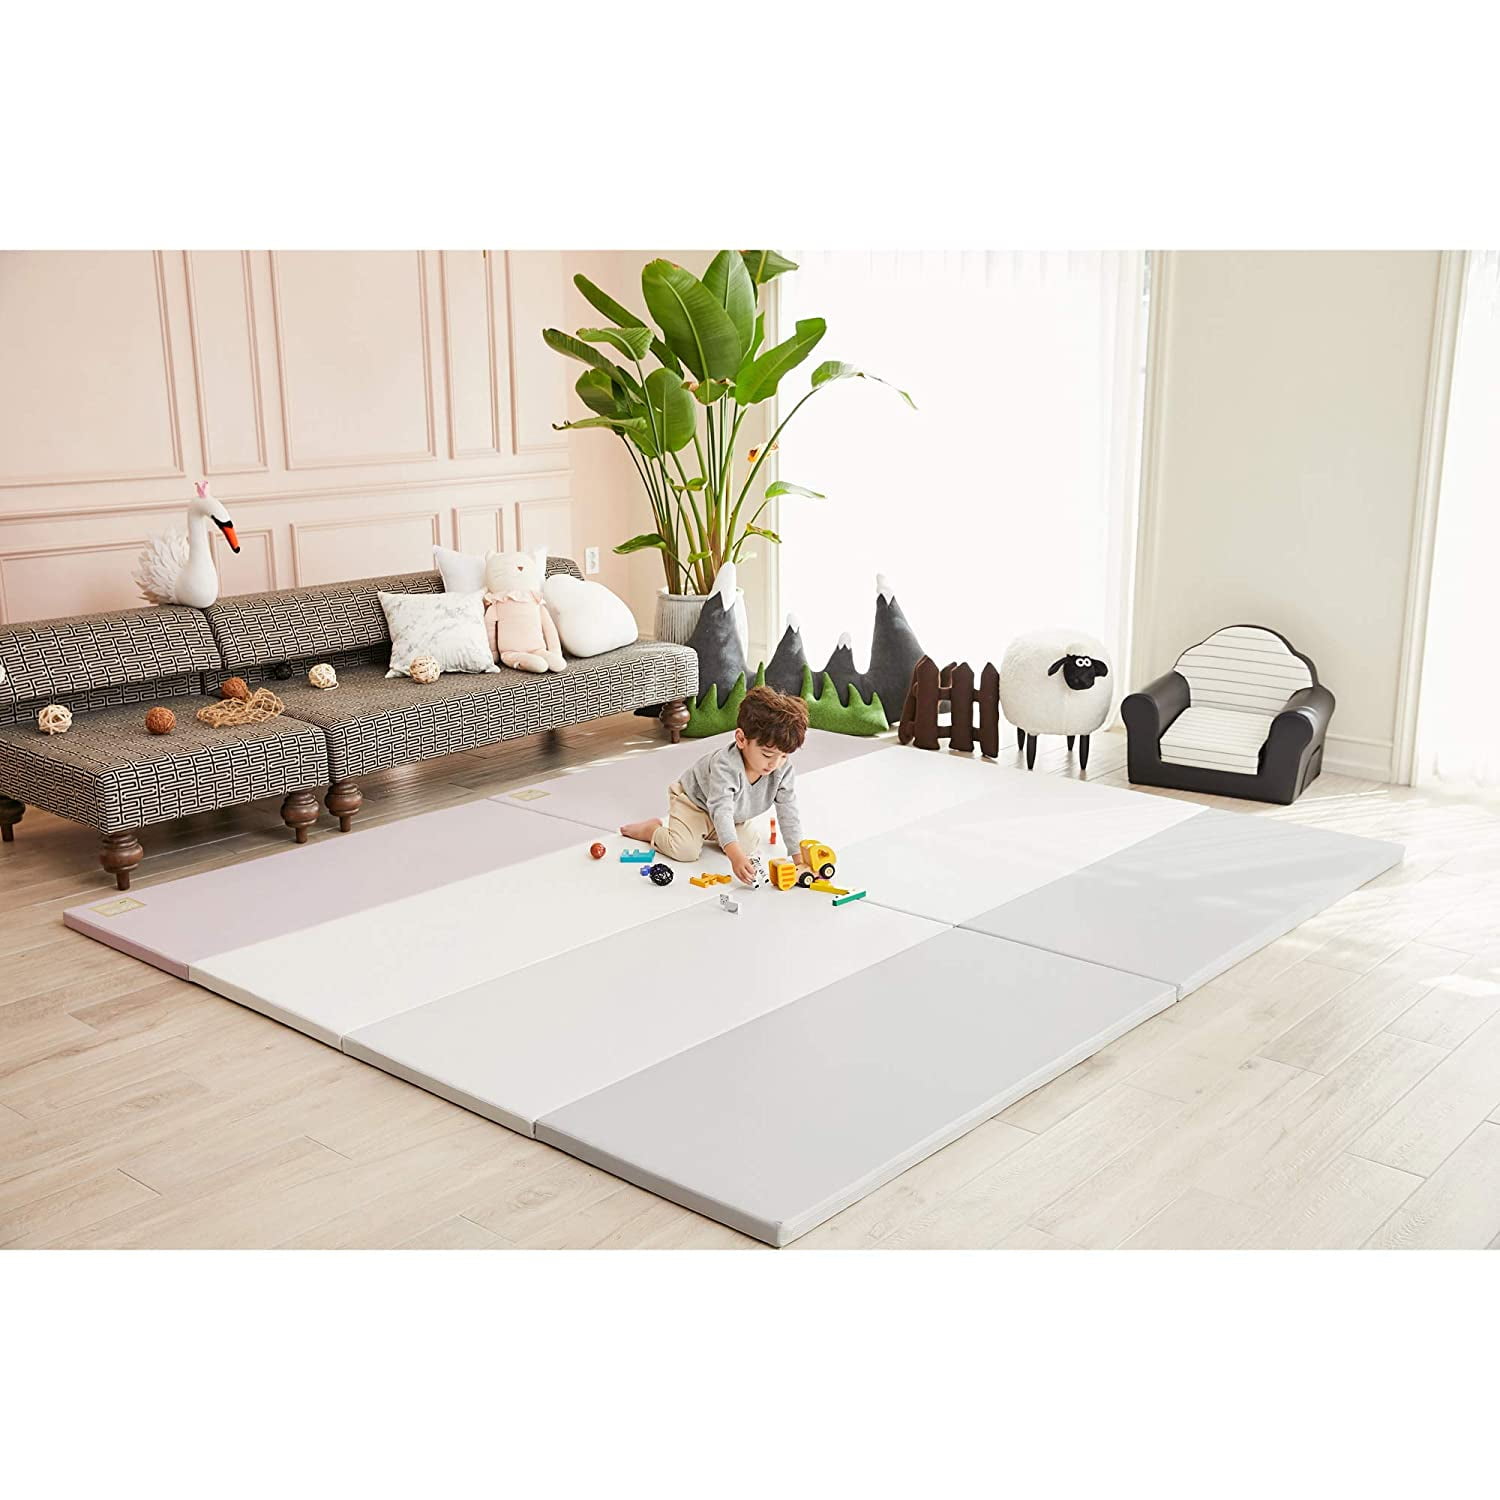 SG size 240x140 cm Certified Non Toxic ALZIP Dust Zero Baby Play Mat Tummy time and Noise Reduction Thick and Large Perfect for Crawling Dust Zero: Urban Grey 